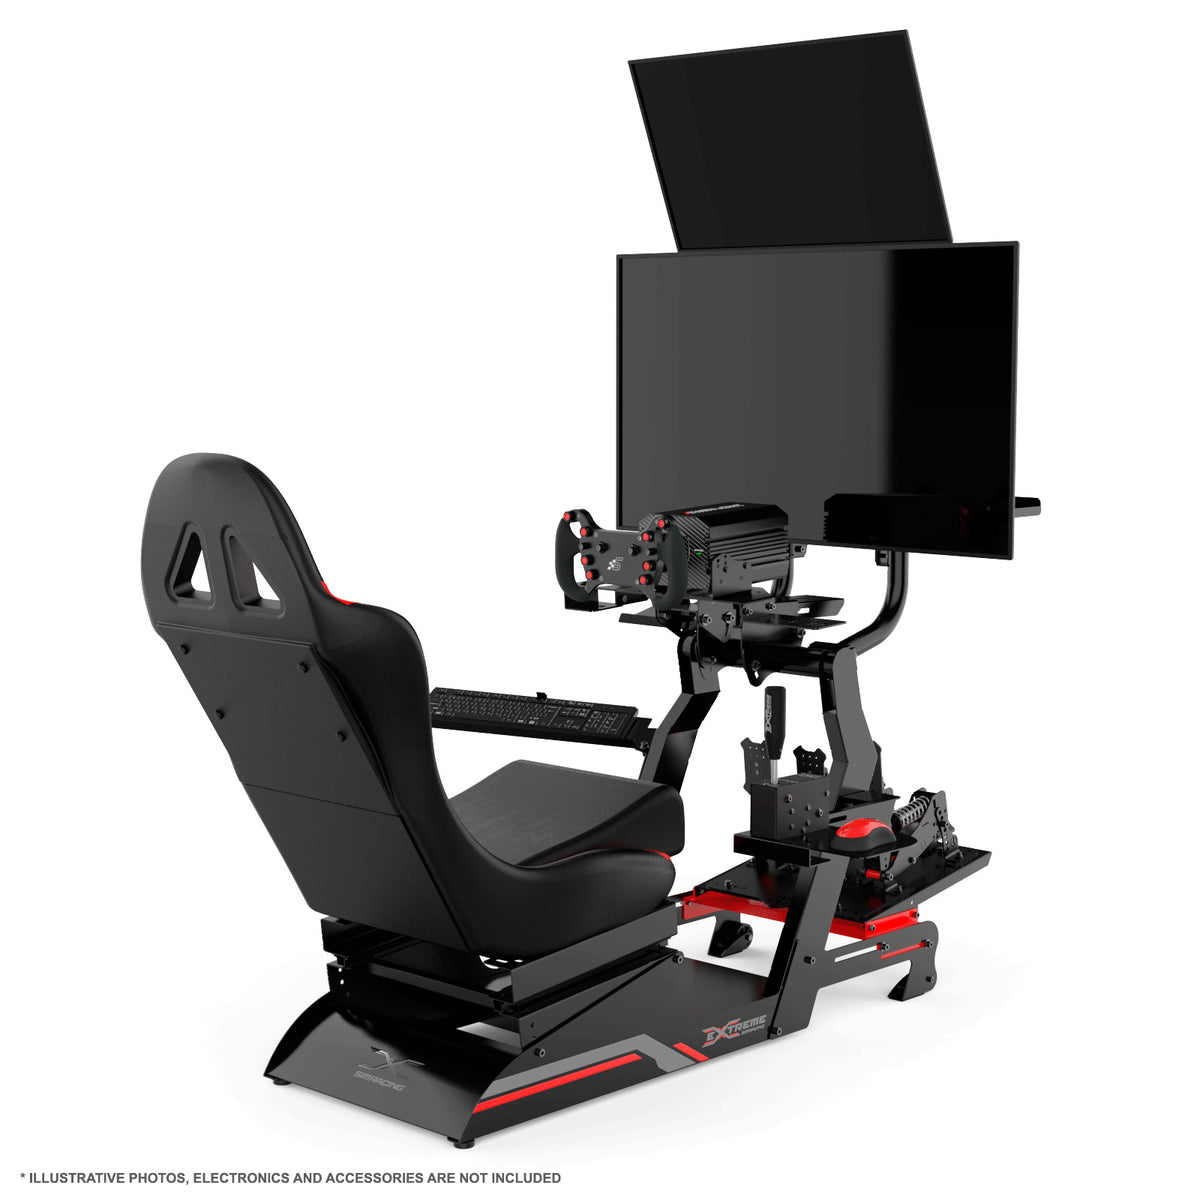 Extreme Simracing Workstation Articulated Keyboard For Virtual